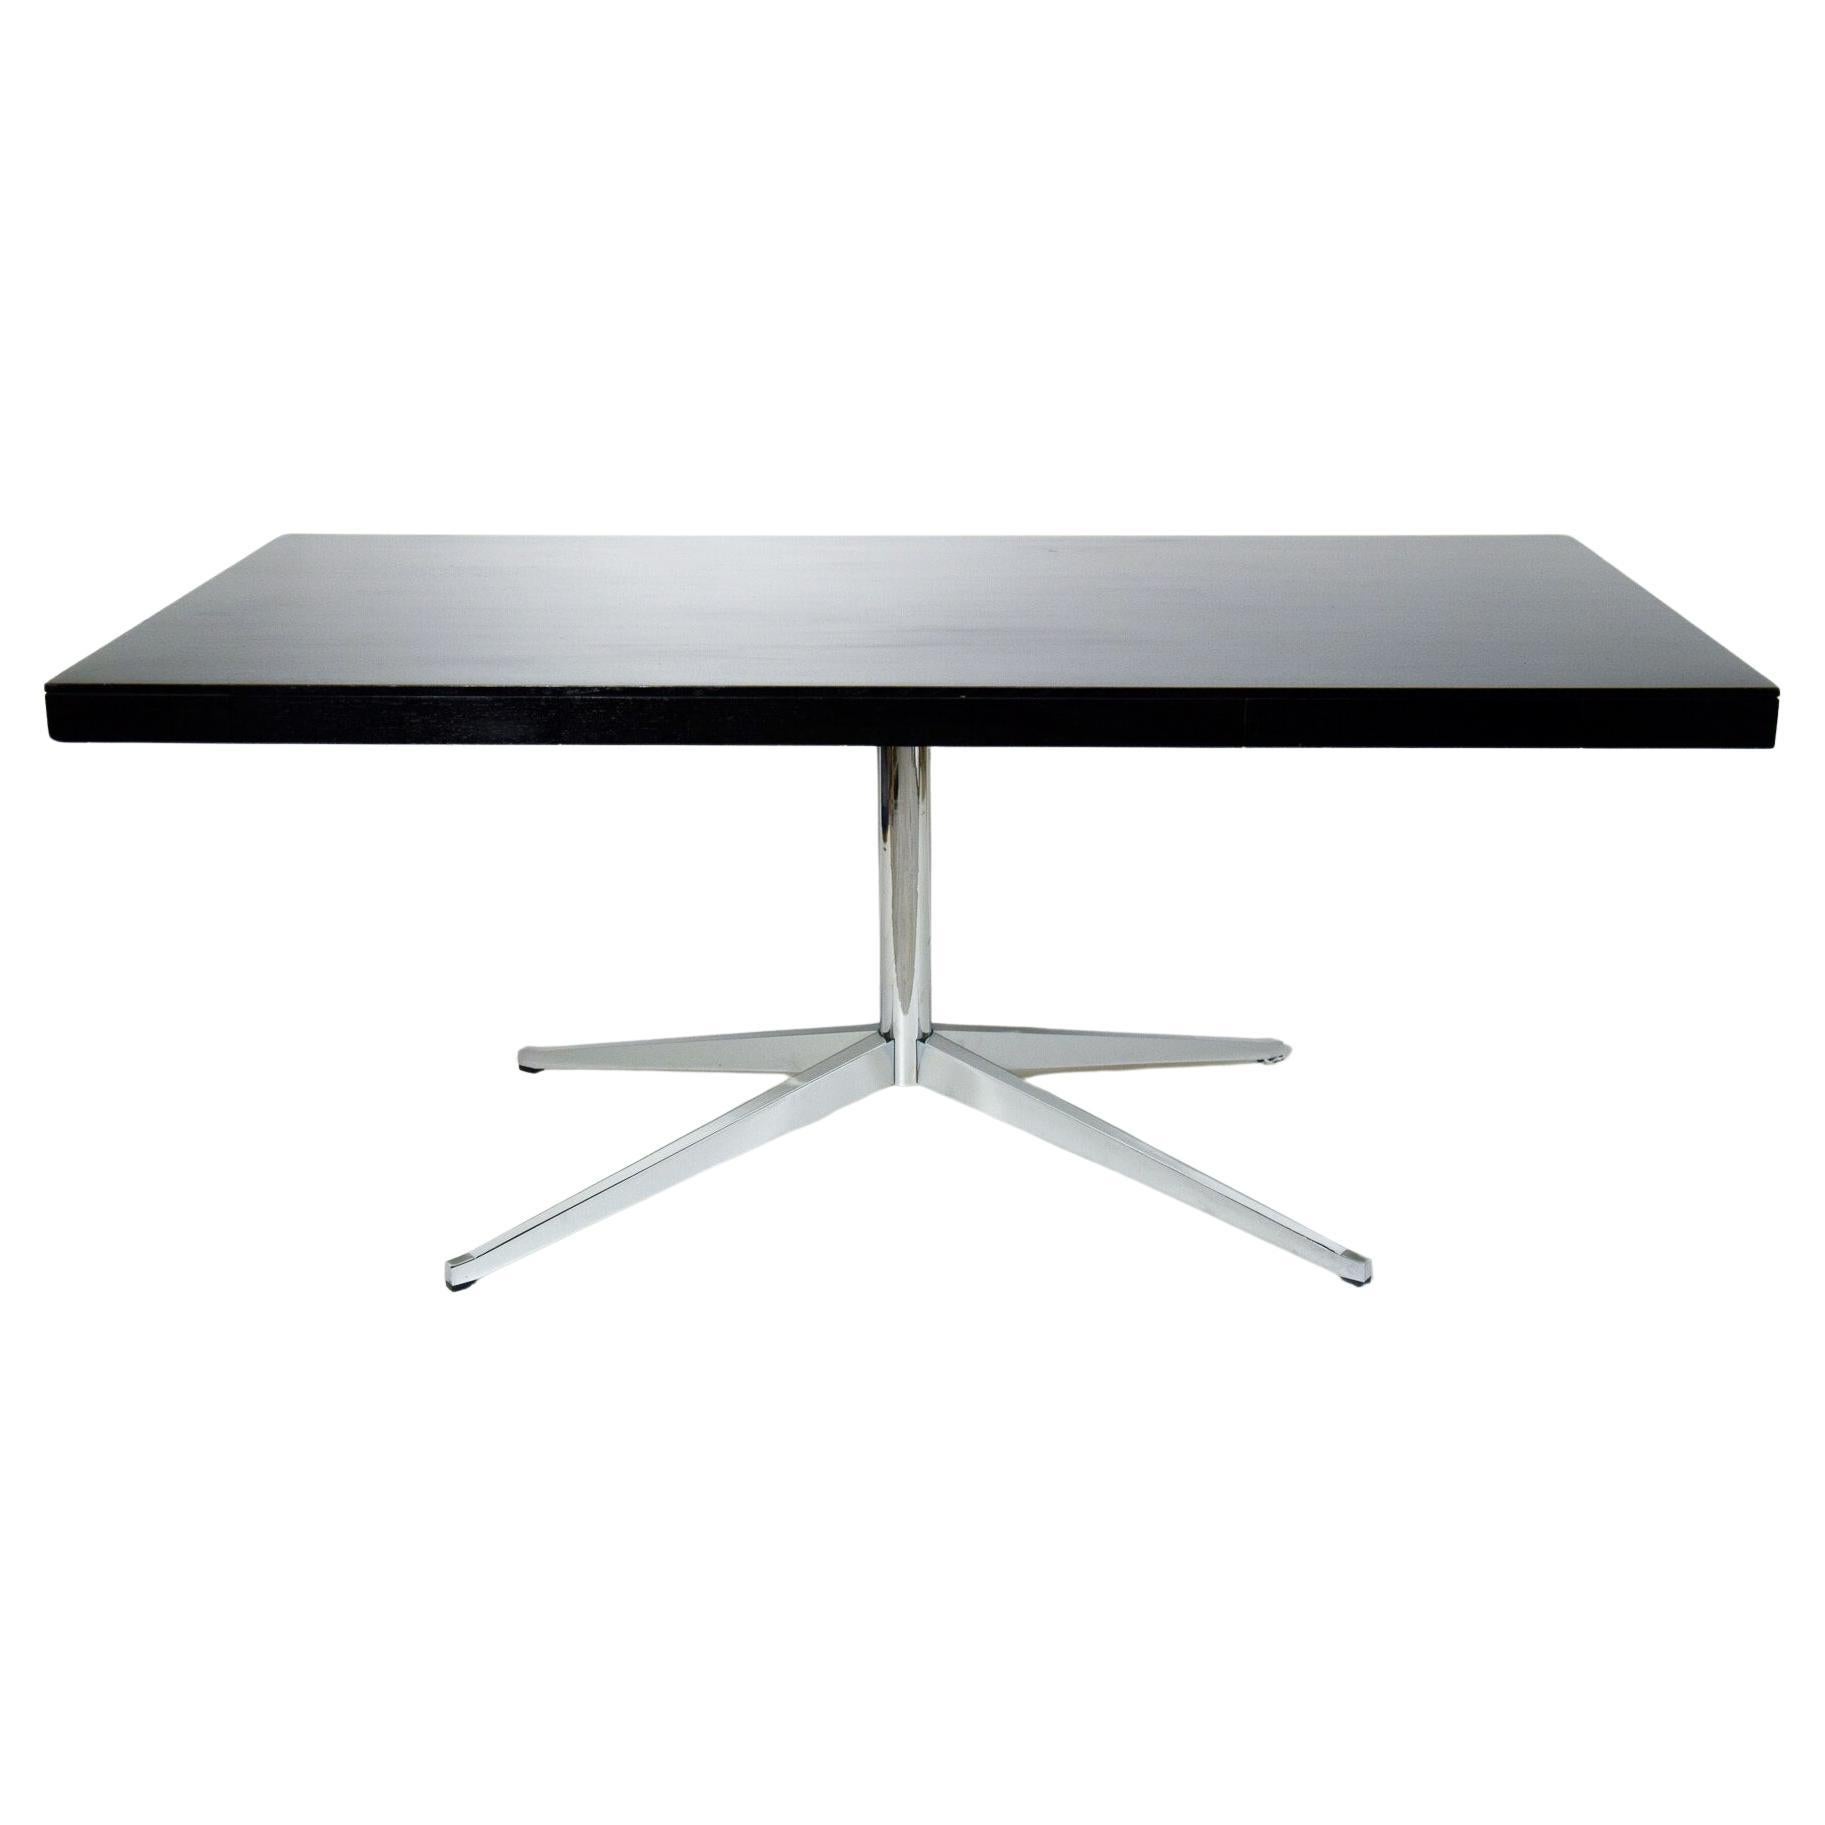 Double Sided Desk in Black Lacquered by Florence Knoll, 1960s